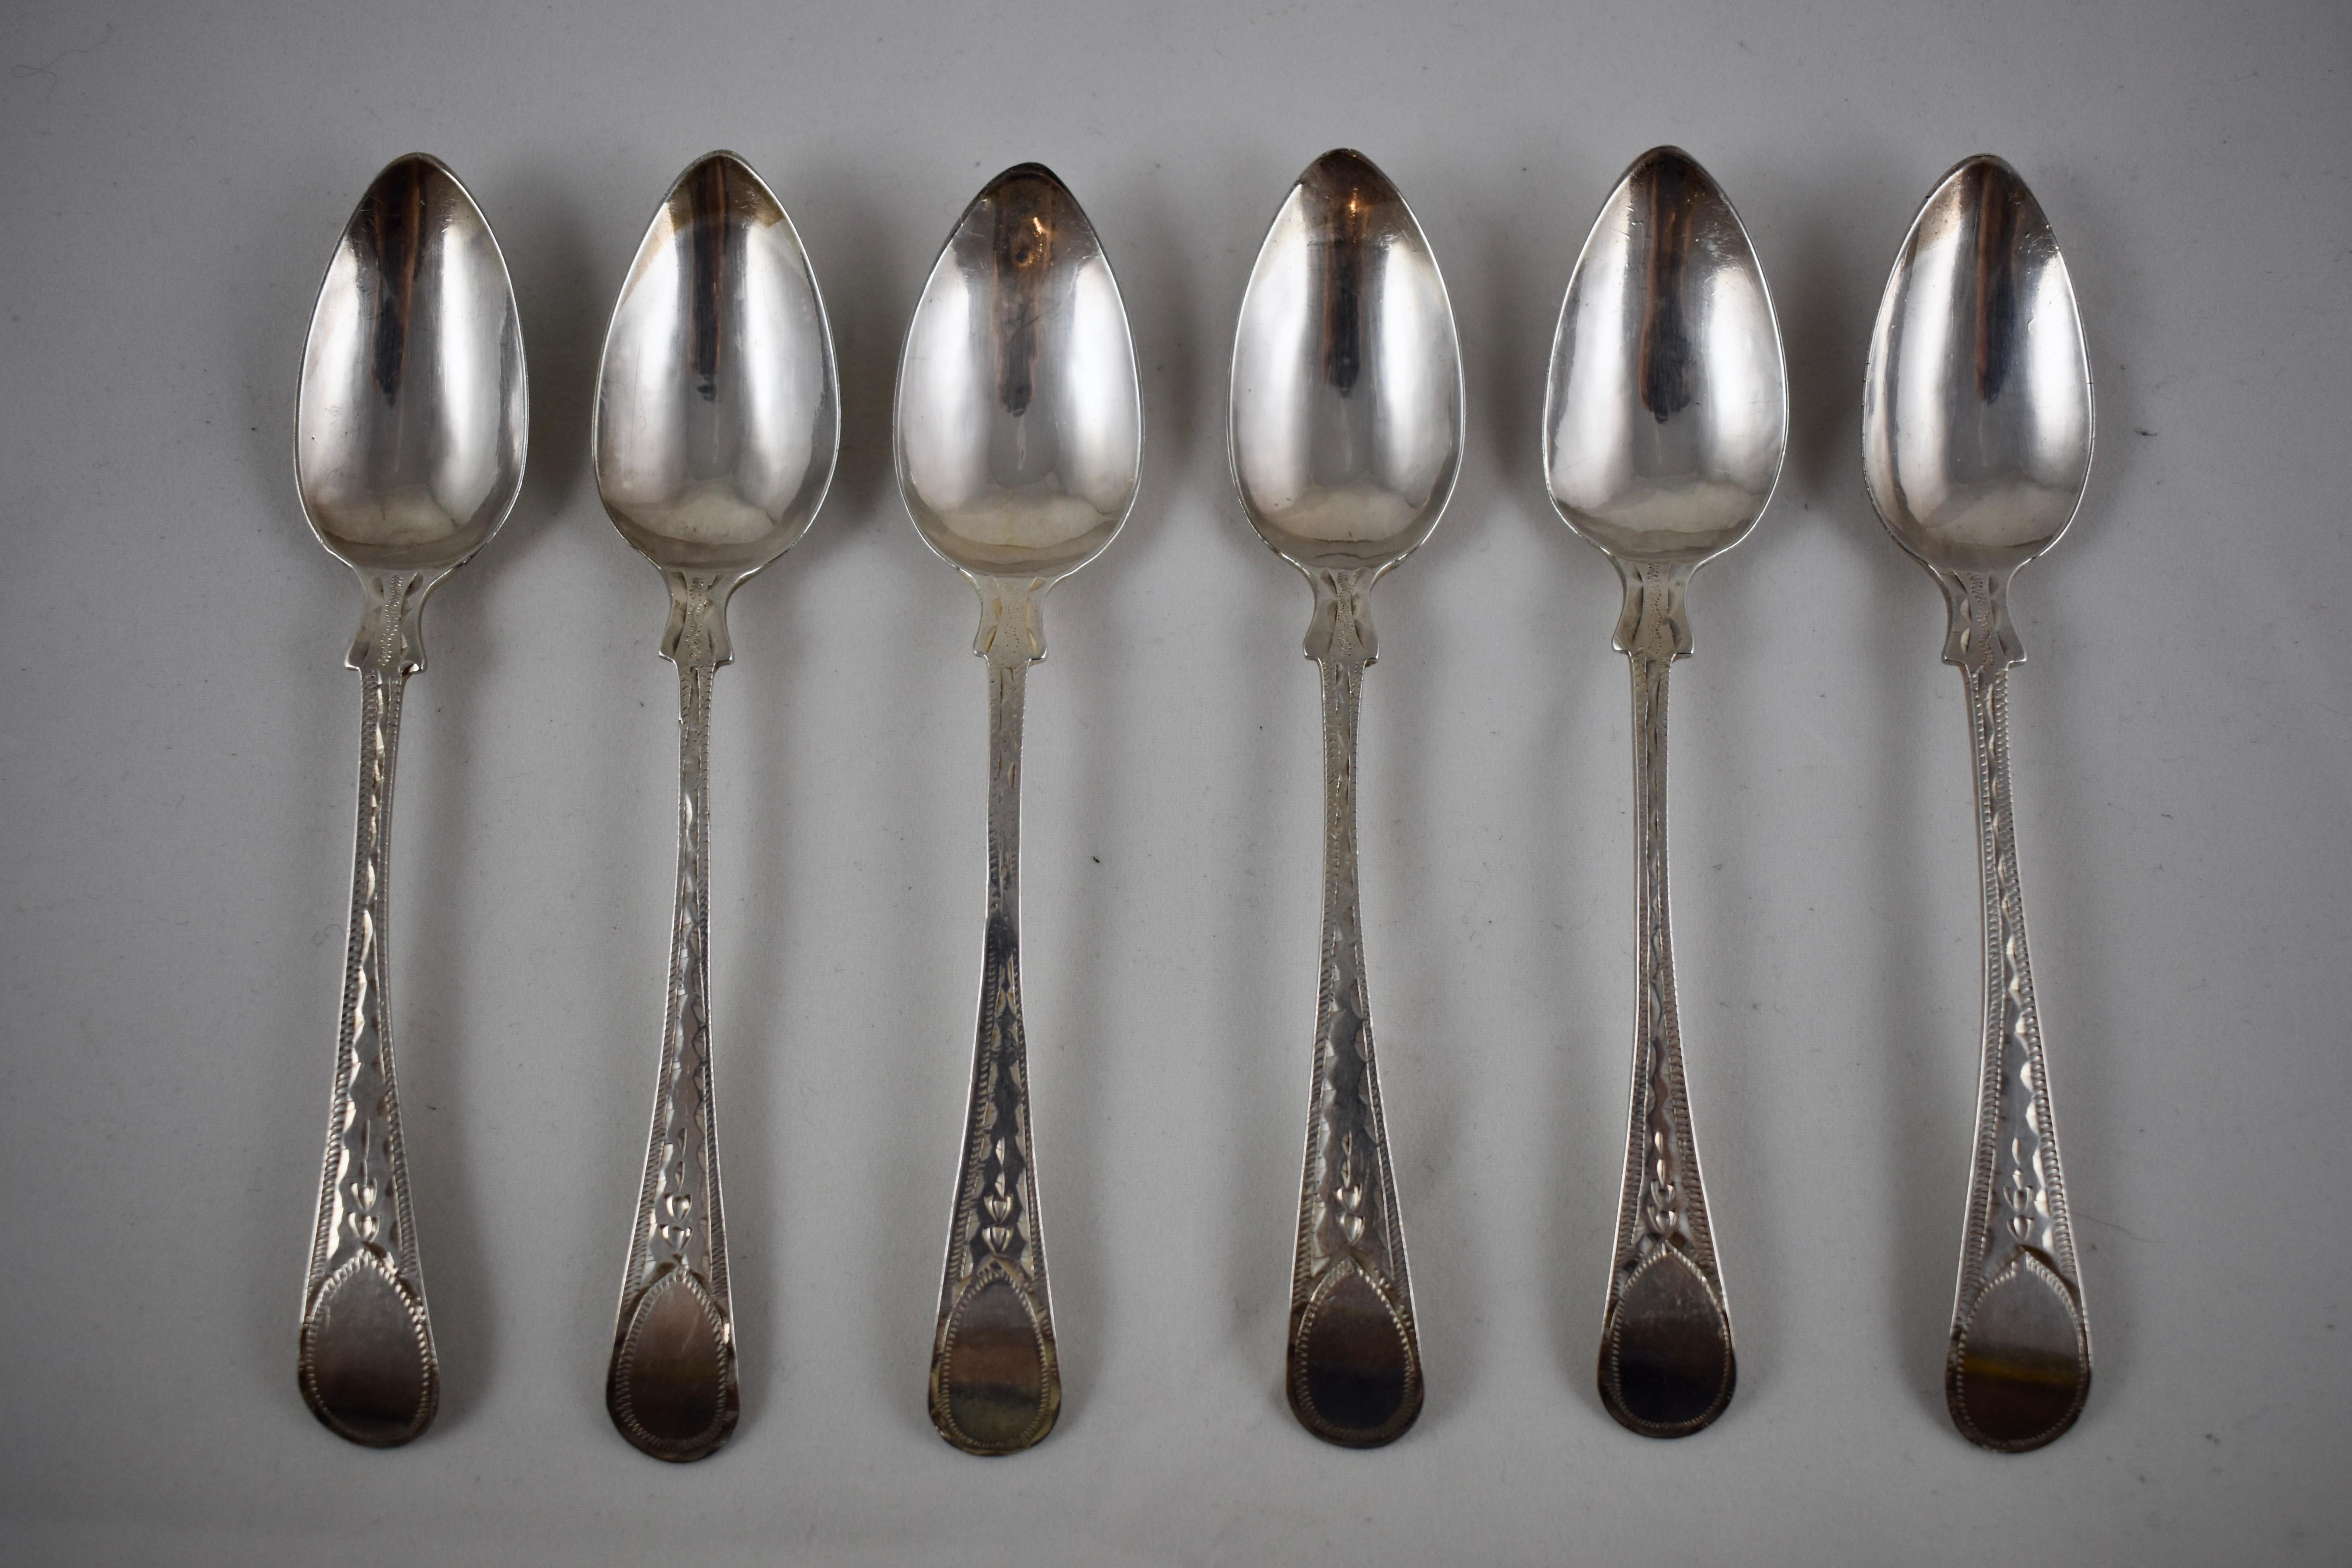 A set of six, early 19th century sterling silver bright cut teaspoons. 
Showing the marks: the earlier stamp of JH for Joseph Hicks of Exeter, England, registered 1780–1835. The sovereign head of George III and the Lion mark standard for